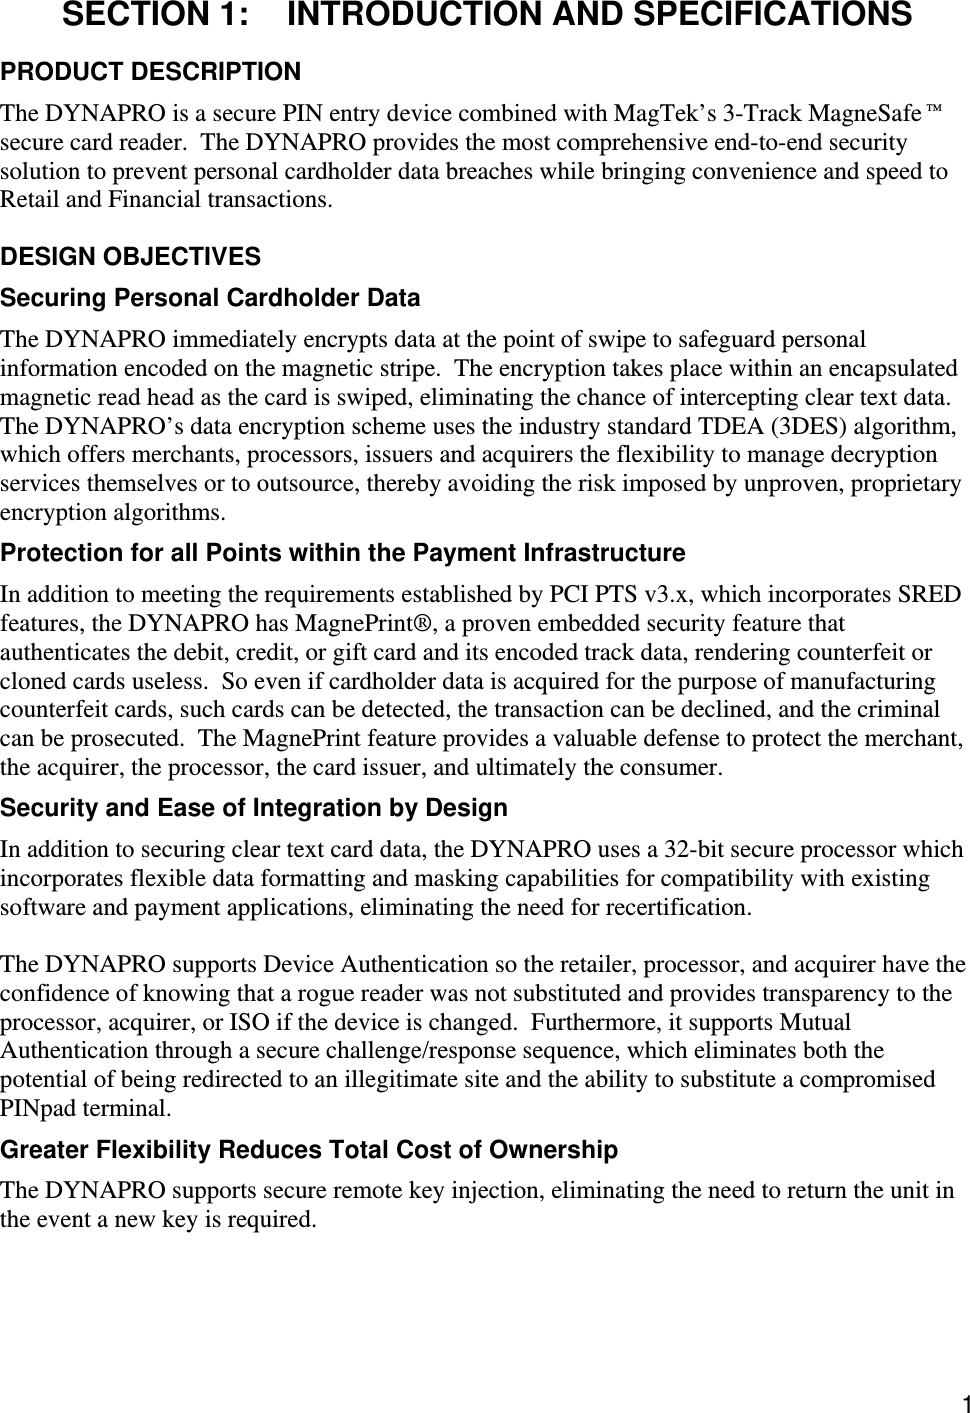  1 SECTION 1:  INTRODUCTION AND SPECIFICATIONS PRODUCT DESCRIPTION The DYNAPRO is a secure PIN entry device combined with MagTek’s 3-Track MagneSafe™ secure card reader.  The DYNAPRO provides the most comprehensive end-to-end security solution to prevent personal cardholder data breaches while bringing convenience and speed to Retail and Financial transactions.  DESIGN OBJECTIVES Securing Personal Cardholder Data The DYNAPRO immediately encrypts data at the point of swipe to safeguard personal information encoded on the magnetic stripe.  The encryption takes place within an encapsulated magnetic read head as the card is swiped, eliminating the chance of intercepting clear text data.  The DYNAPRO’s data encryption scheme uses the industry standard TDEA (3DES) algorithm, which offers merchants, processors, issuers and acquirers the flexibility to manage decryption services themselves or to outsource, thereby avoiding the risk imposed by unproven, proprietary encryption algorithms. Protection for all Points within the Payment Infrastructure In addition to meeting the requirements established by PCI PTS v3.x, which incorporates SRED features, the DYNAPRO has MagnePrint®, a proven embedded security feature that authenticates the debit, credit, or gift card and its encoded track data, rendering counterfeit or cloned cards useless.  So even if cardholder data is acquired for the purpose of manufacturing counterfeit cards, such cards can be detected, the transaction can be declined, and the criminal can be prosecuted.  The MagnePrint feature provides a valuable defense to protect the merchant, the acquirer, the processor, the card issuer, and ultimately the consumer. Security and Ease of Integration by Design In addition to securing clear text card data, the DYNAPRO uses a 32-bit secure processor which incorporates flexible data formatting and masking capabilities for compatibility with existing software and payment applications, eliminating the need for recertification.  The DYNAPRO supports Device Authentication so the retailer, processor, and acquirer have the confidence of knowing that a rogue reader was not substituted and provides transparency to the processor, acquirer, or ISO if the device is changed.  Furthermore, it supports Mutual Authentication through a secure challenge/response sequence, which eliminates both the potential of being redirected to an illegitimate site and the ability to substitute a compromised PINpad terminal. Greater Flexibility Reduces Total Cost of Ownership The DYNAPRO supports secure remote key injection, eliminating the need to return the unit in the event a new key is required. 